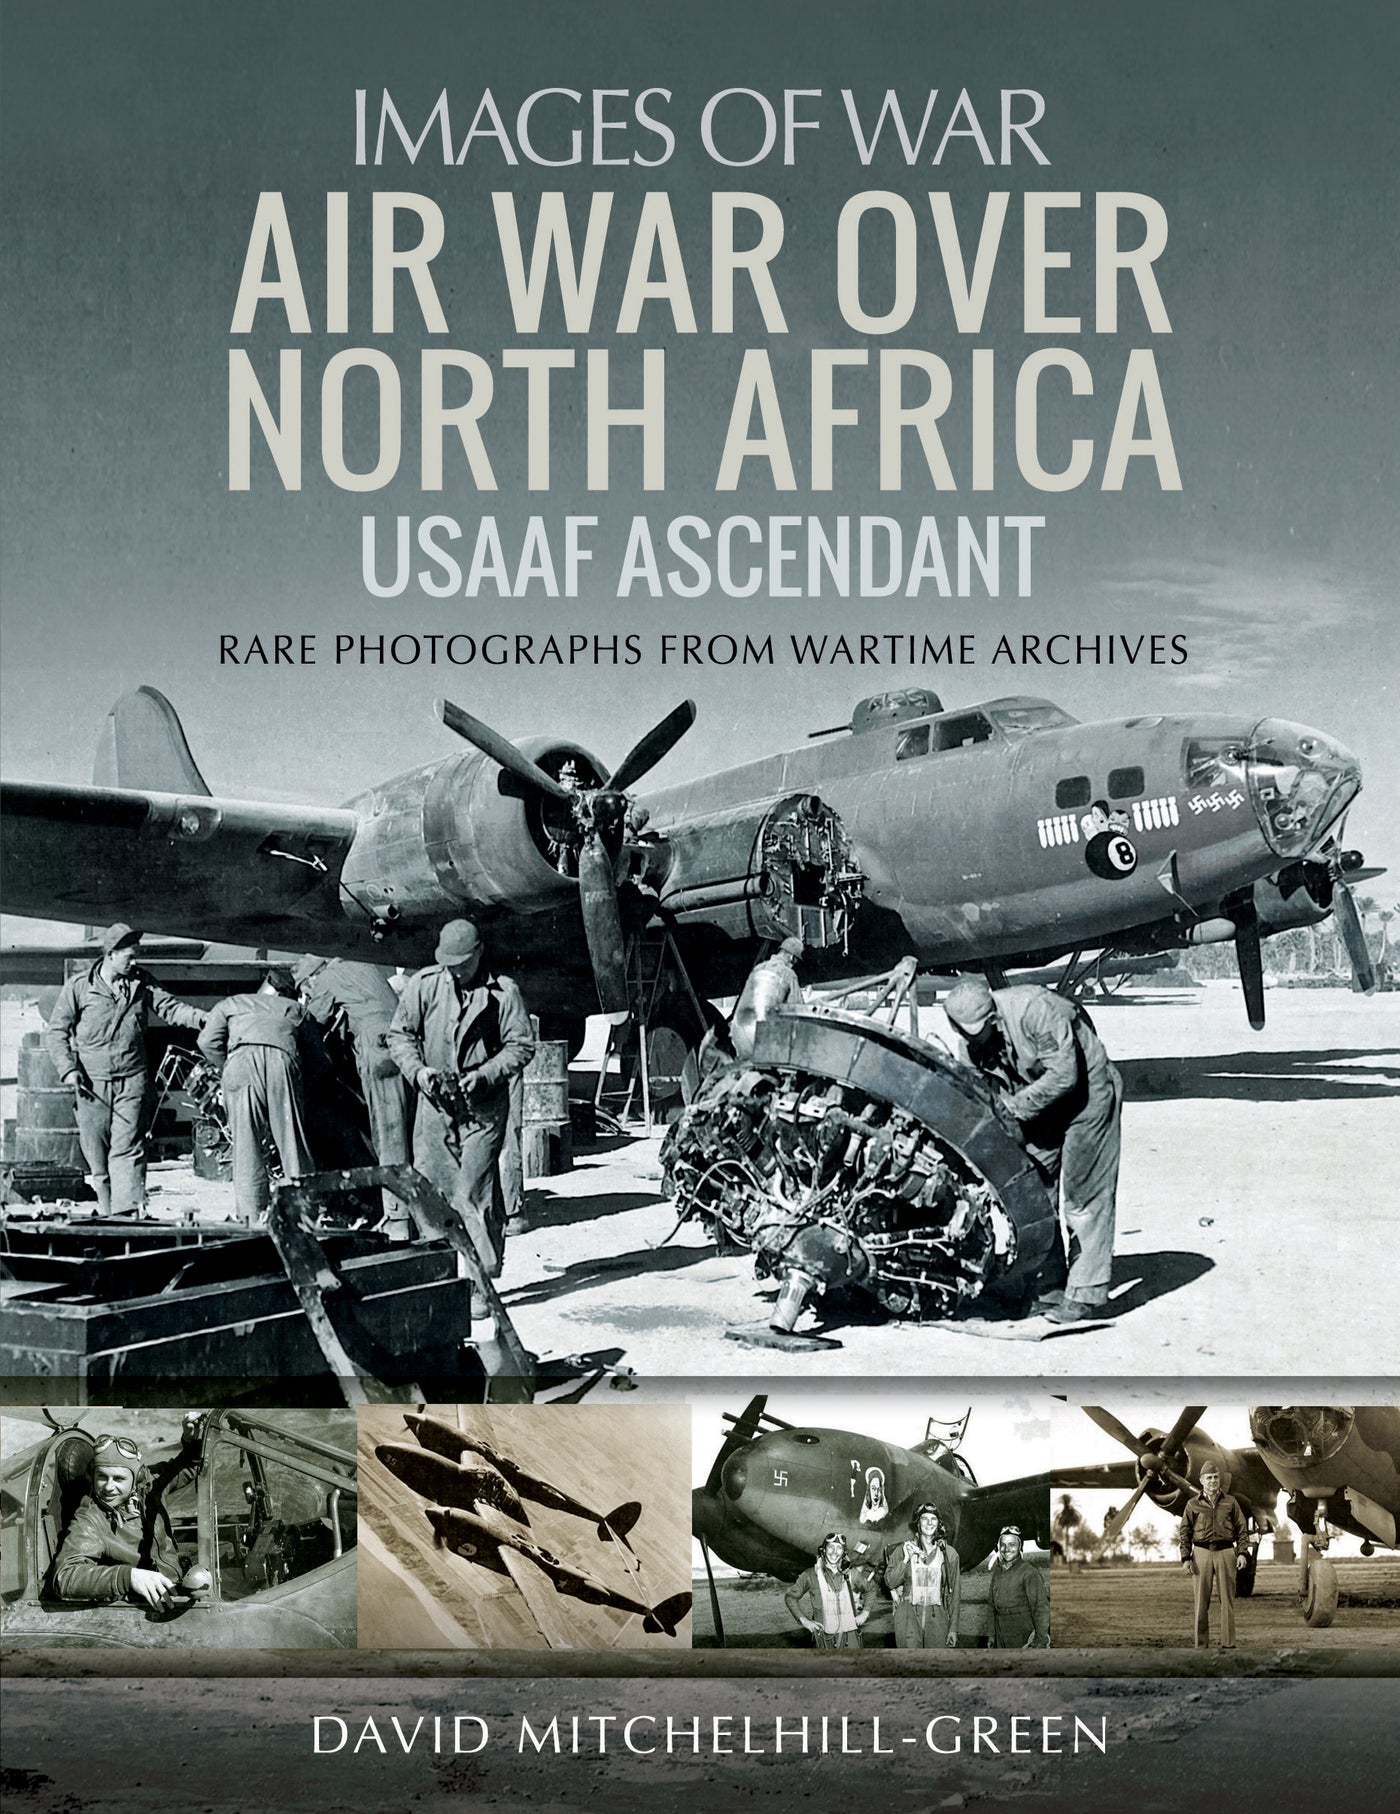 Air War Over North Africa